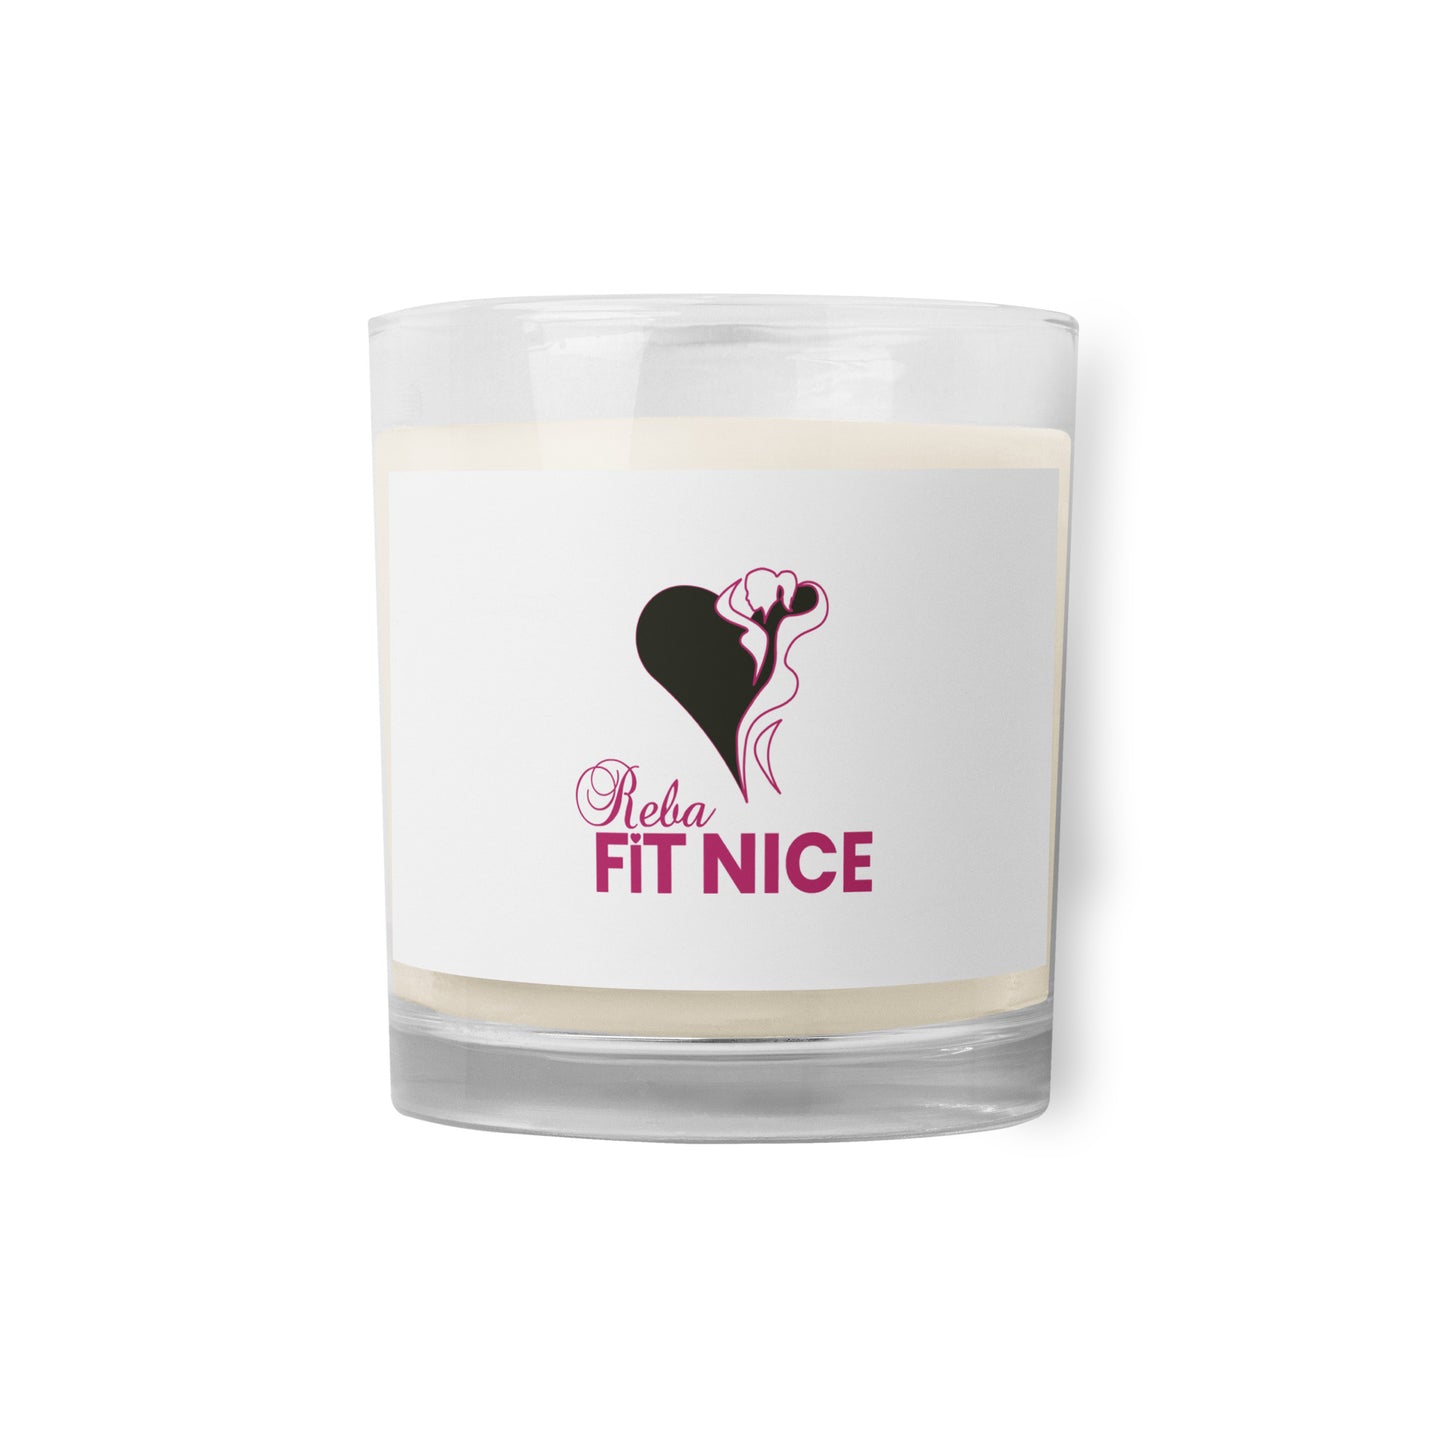 Fit Nice candle